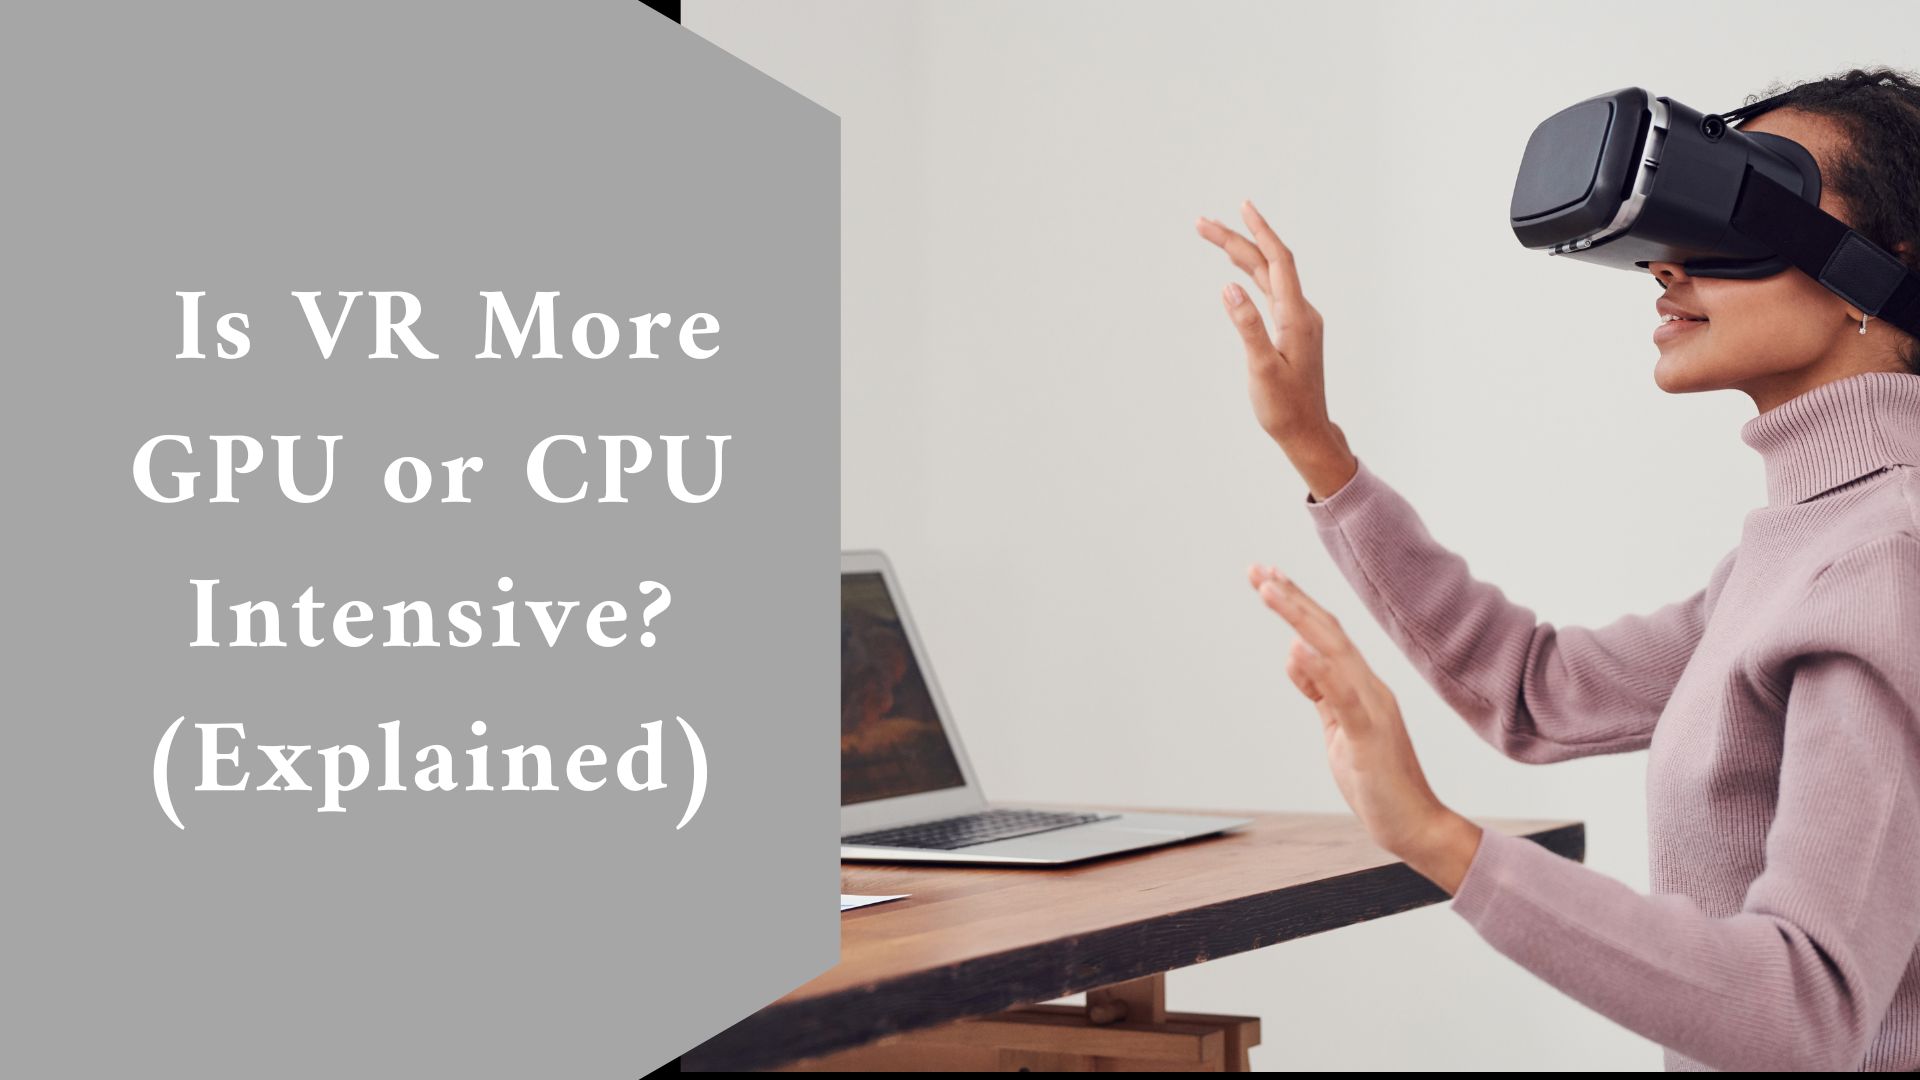 Is VR More GPU or CPU Intensive? (Explained)